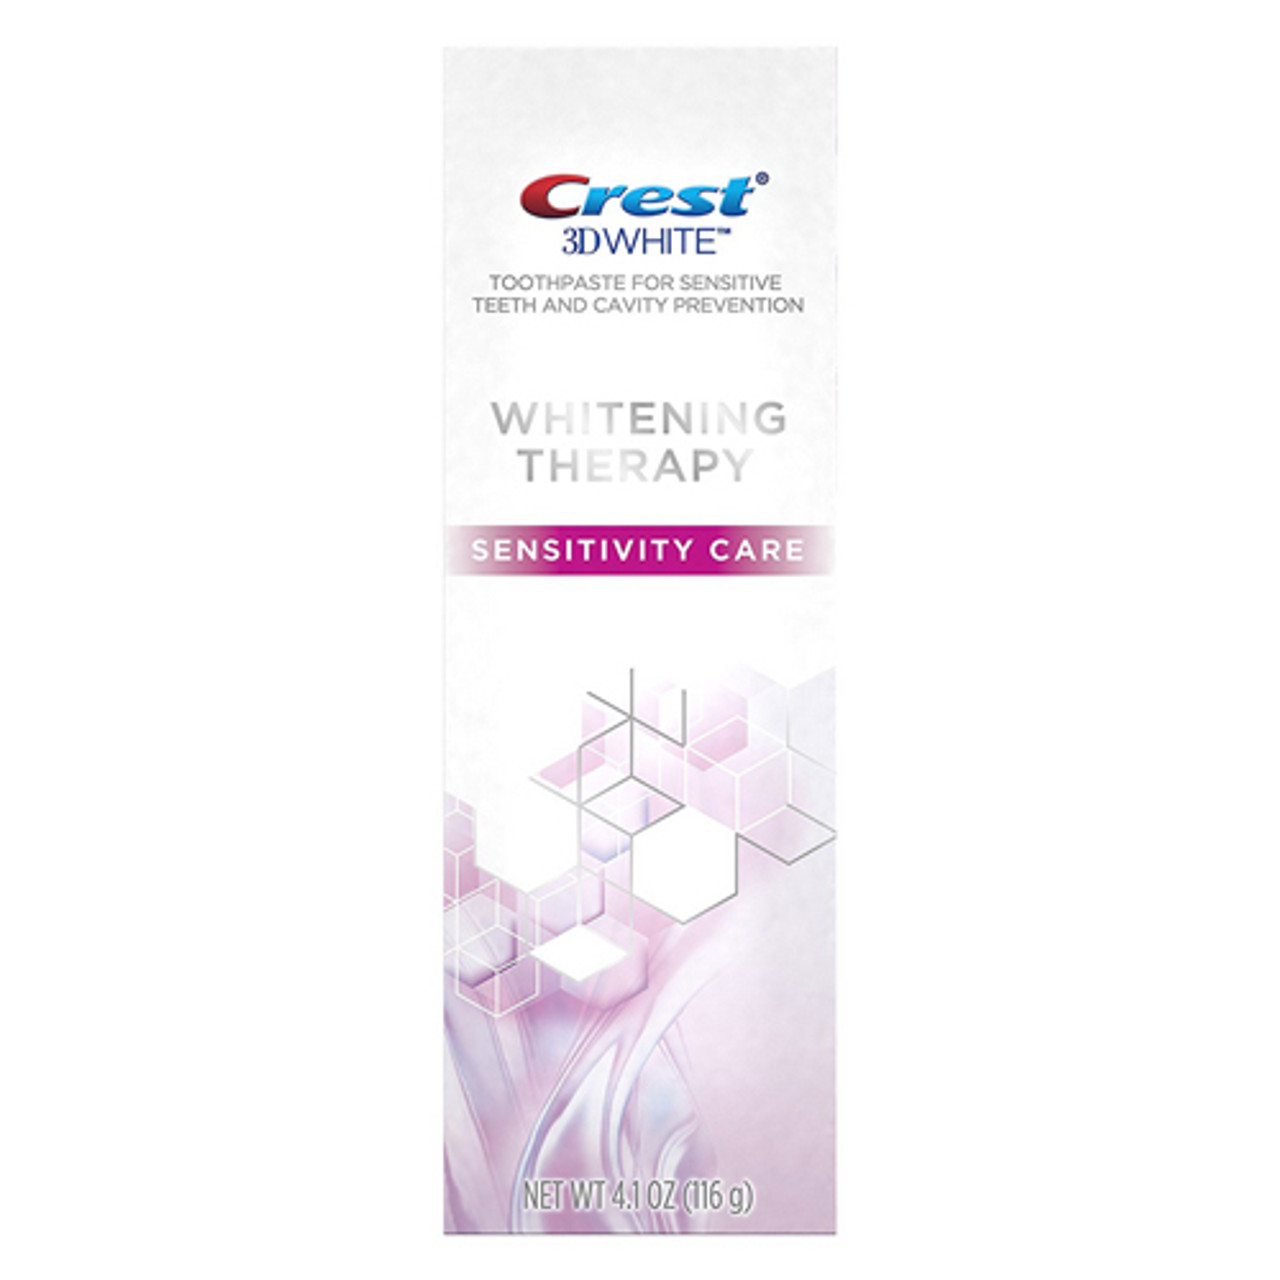 Crest Charcoal 3D White Toothpaste, Whitening Therapy, with Ginger